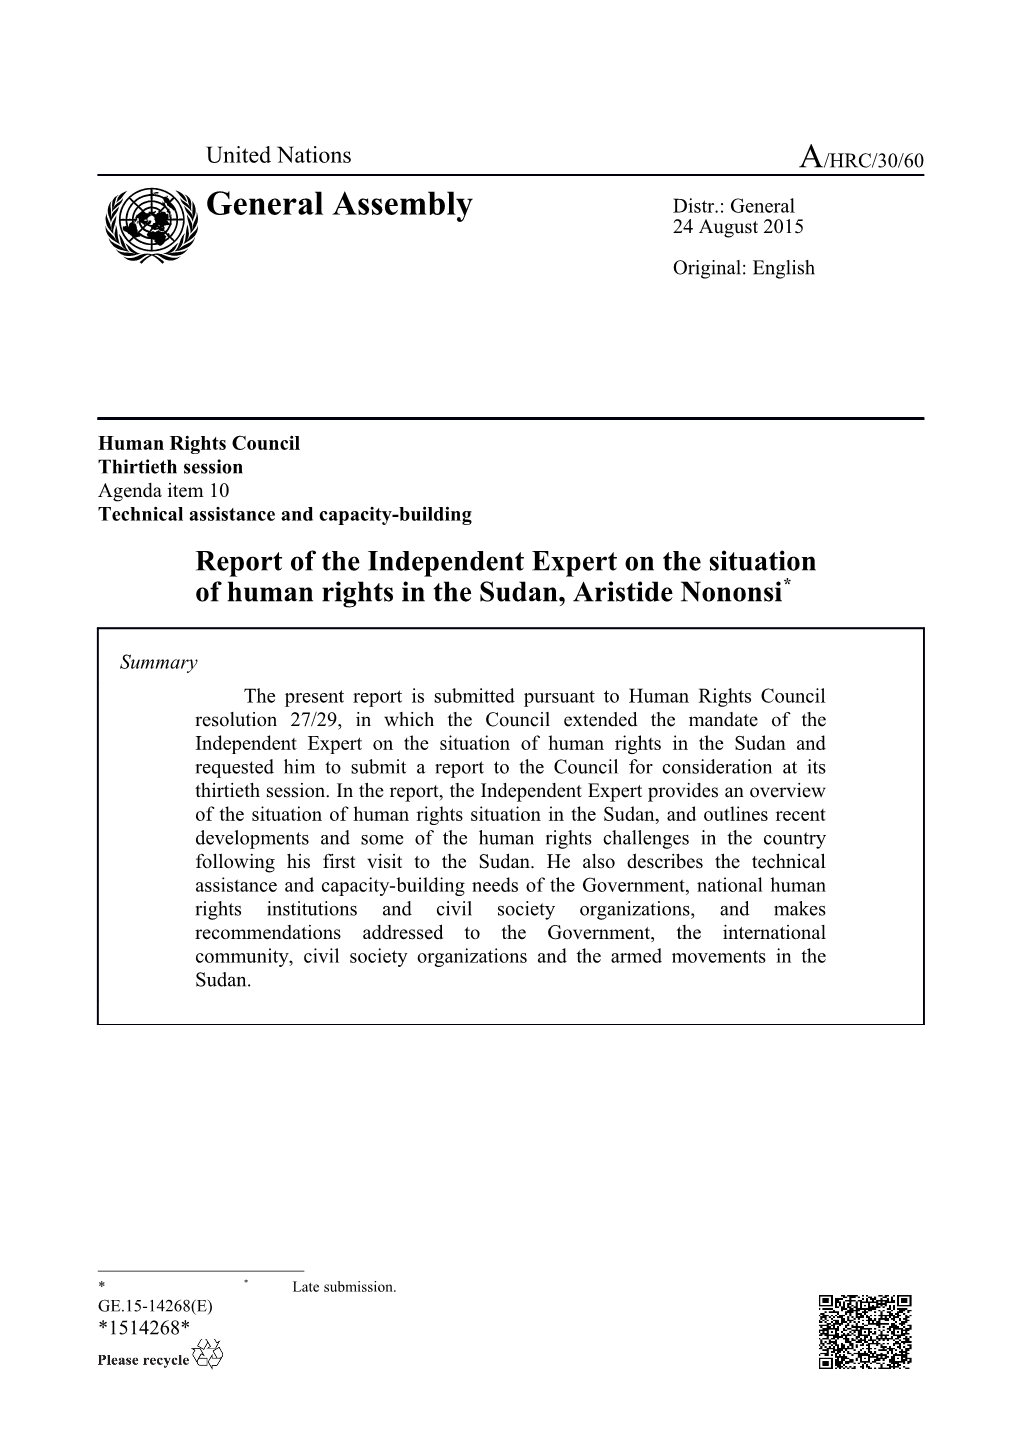 Report of the Independent Expert on the Situation of Human Rights in the Sudan, Aristide